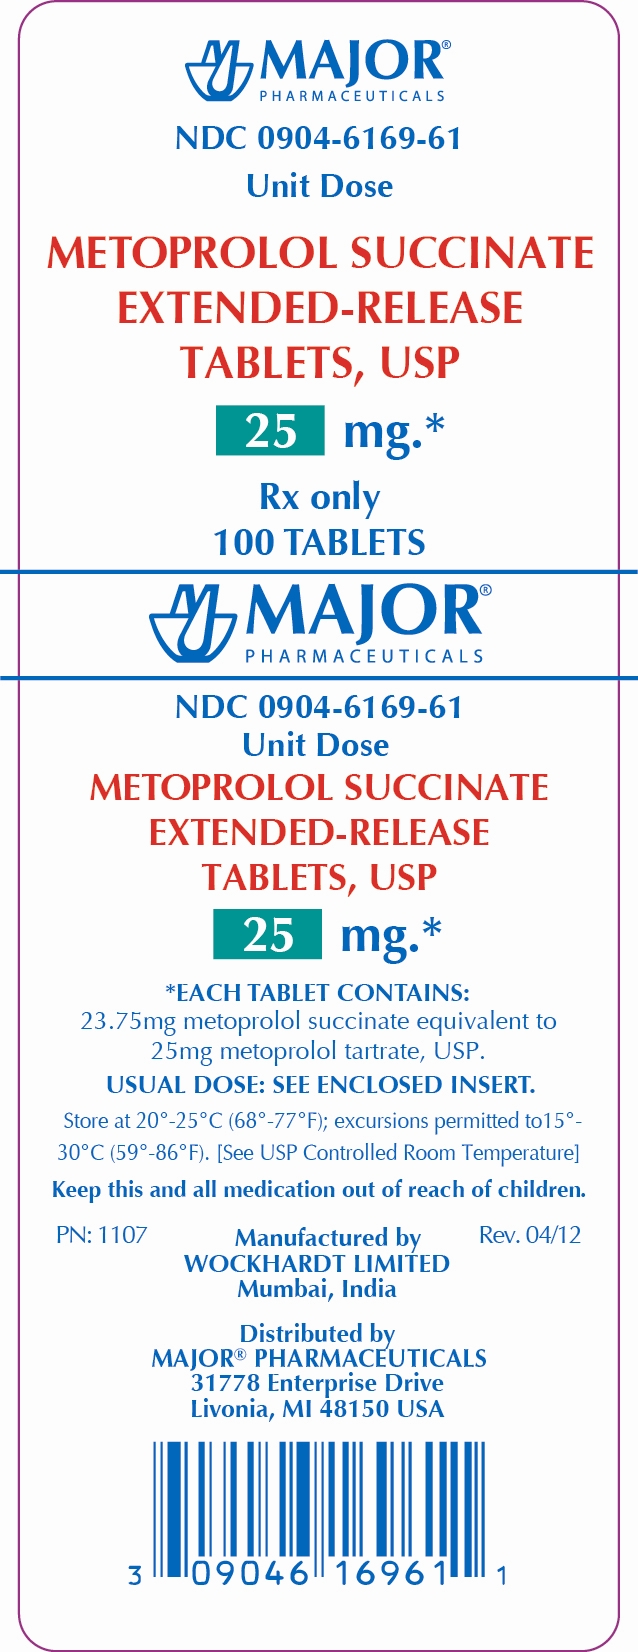 METOPROLOL SUCCINATE EXTENDED-RELEASE TABLETS, USP 25MG